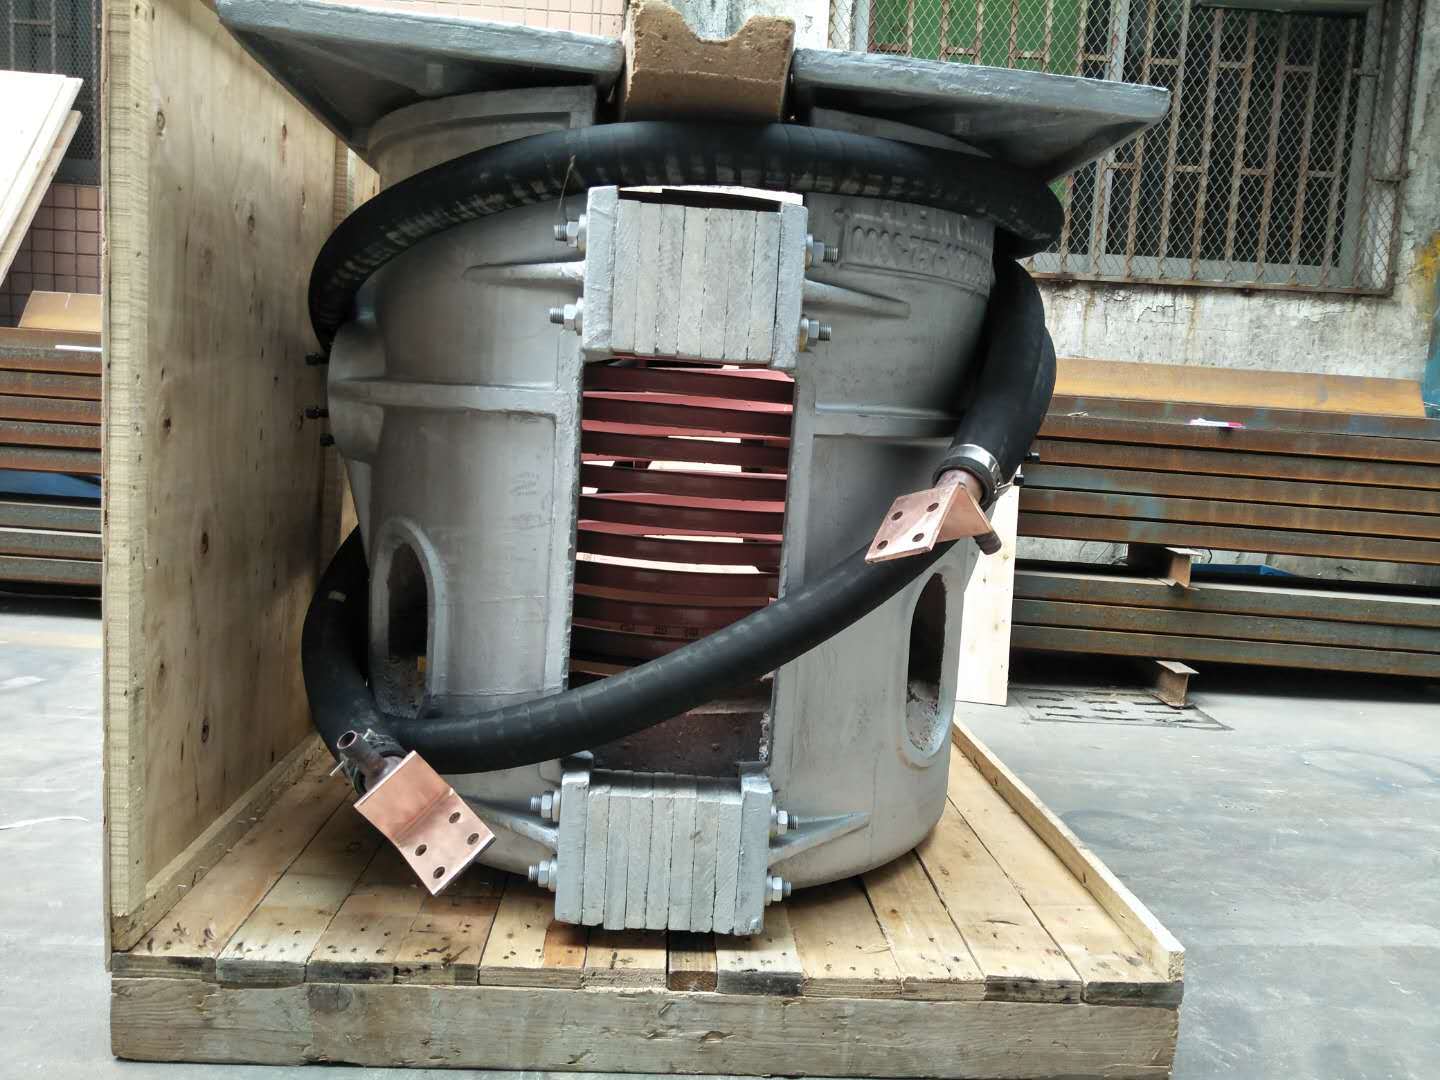 350kg of Aluminium Melting Furnace Shipped to South Africa